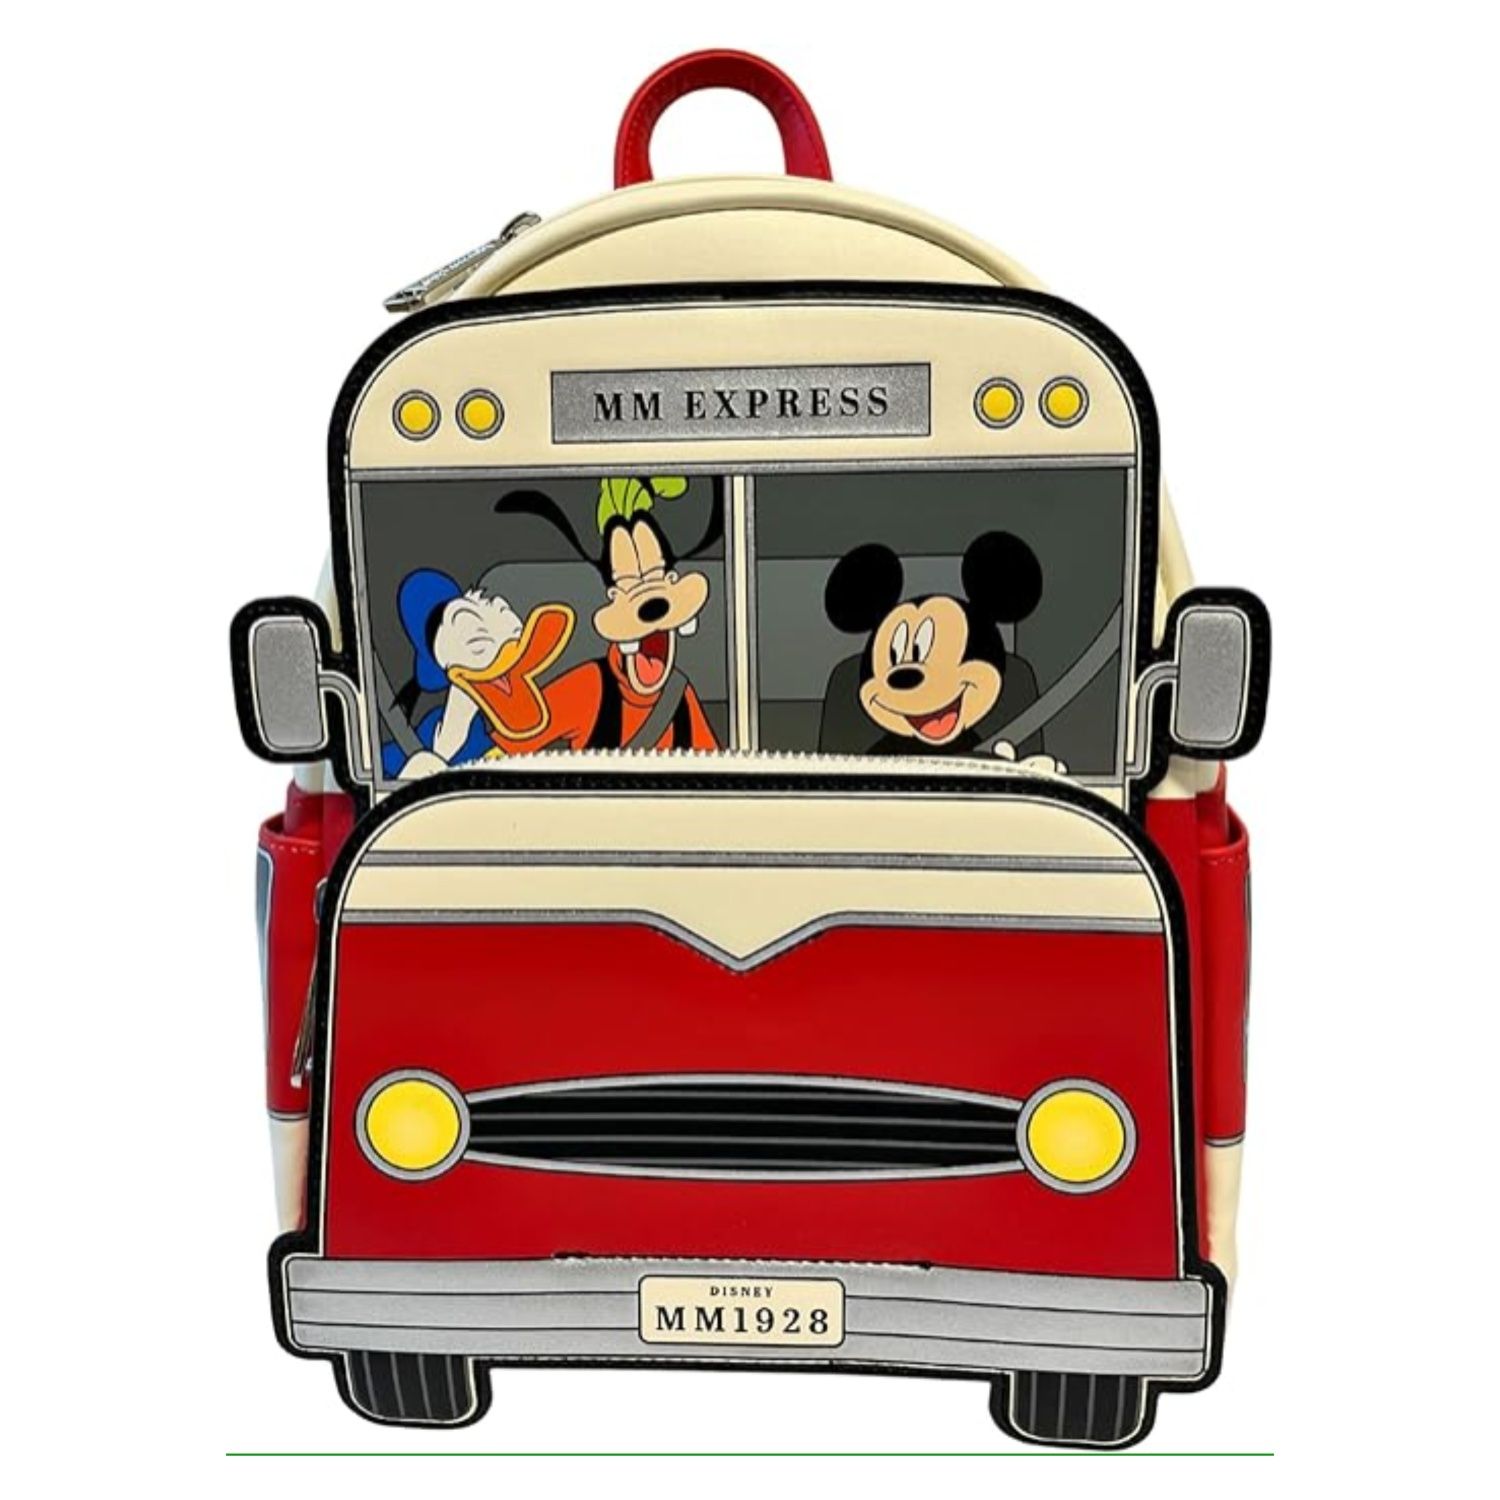 This bag is made to look like a bus. Mickey is driving with Goofy and Donald riding next to him